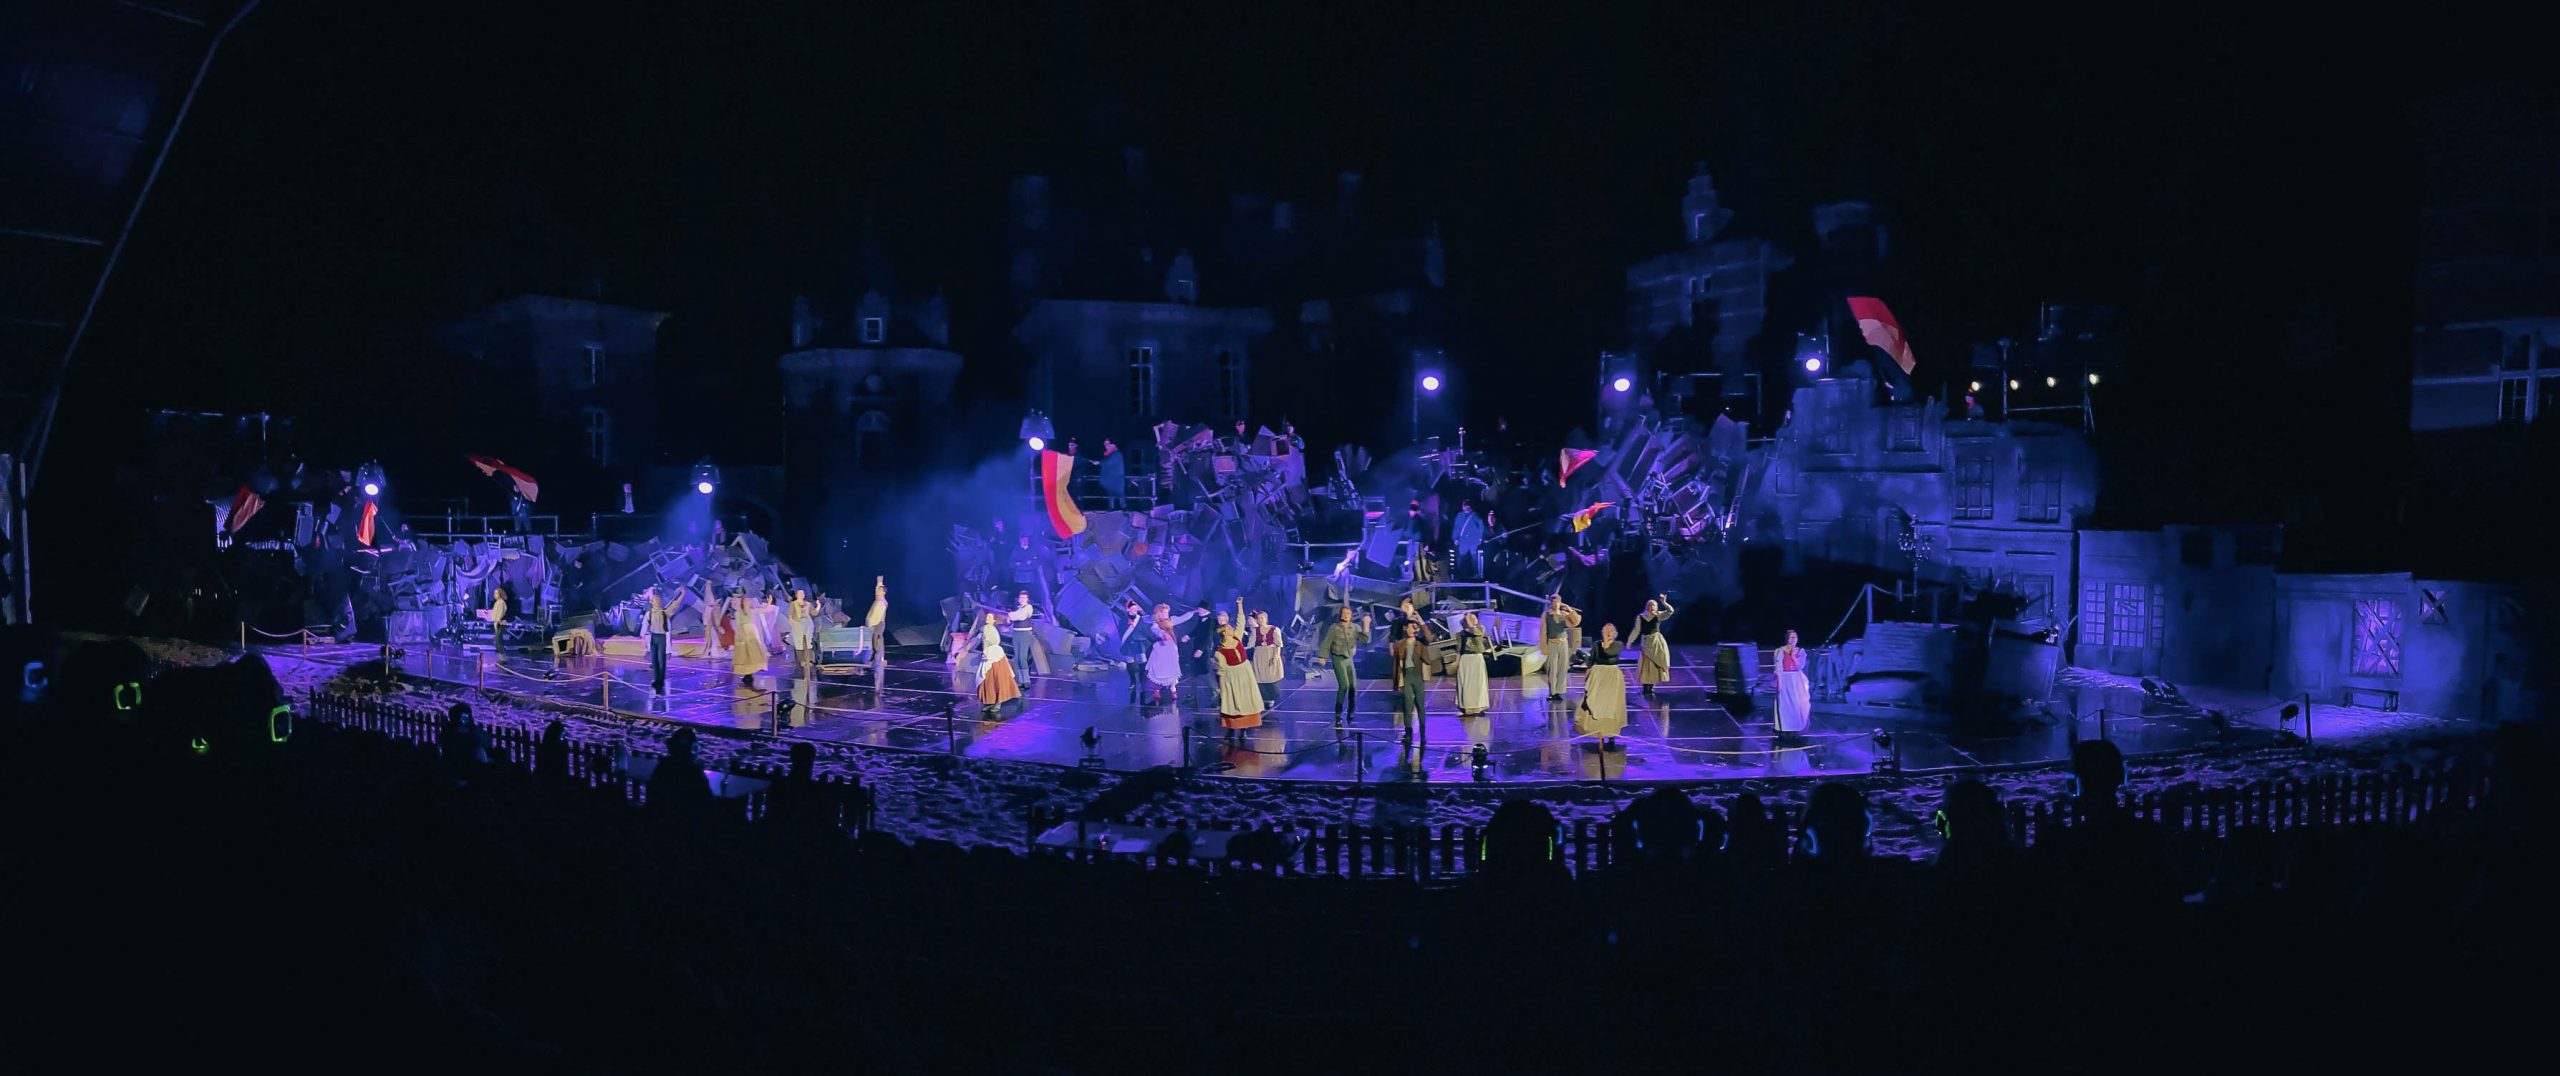 Impressive Musical '1830' On Castle Domain With dLive & Waves System Event Players 9